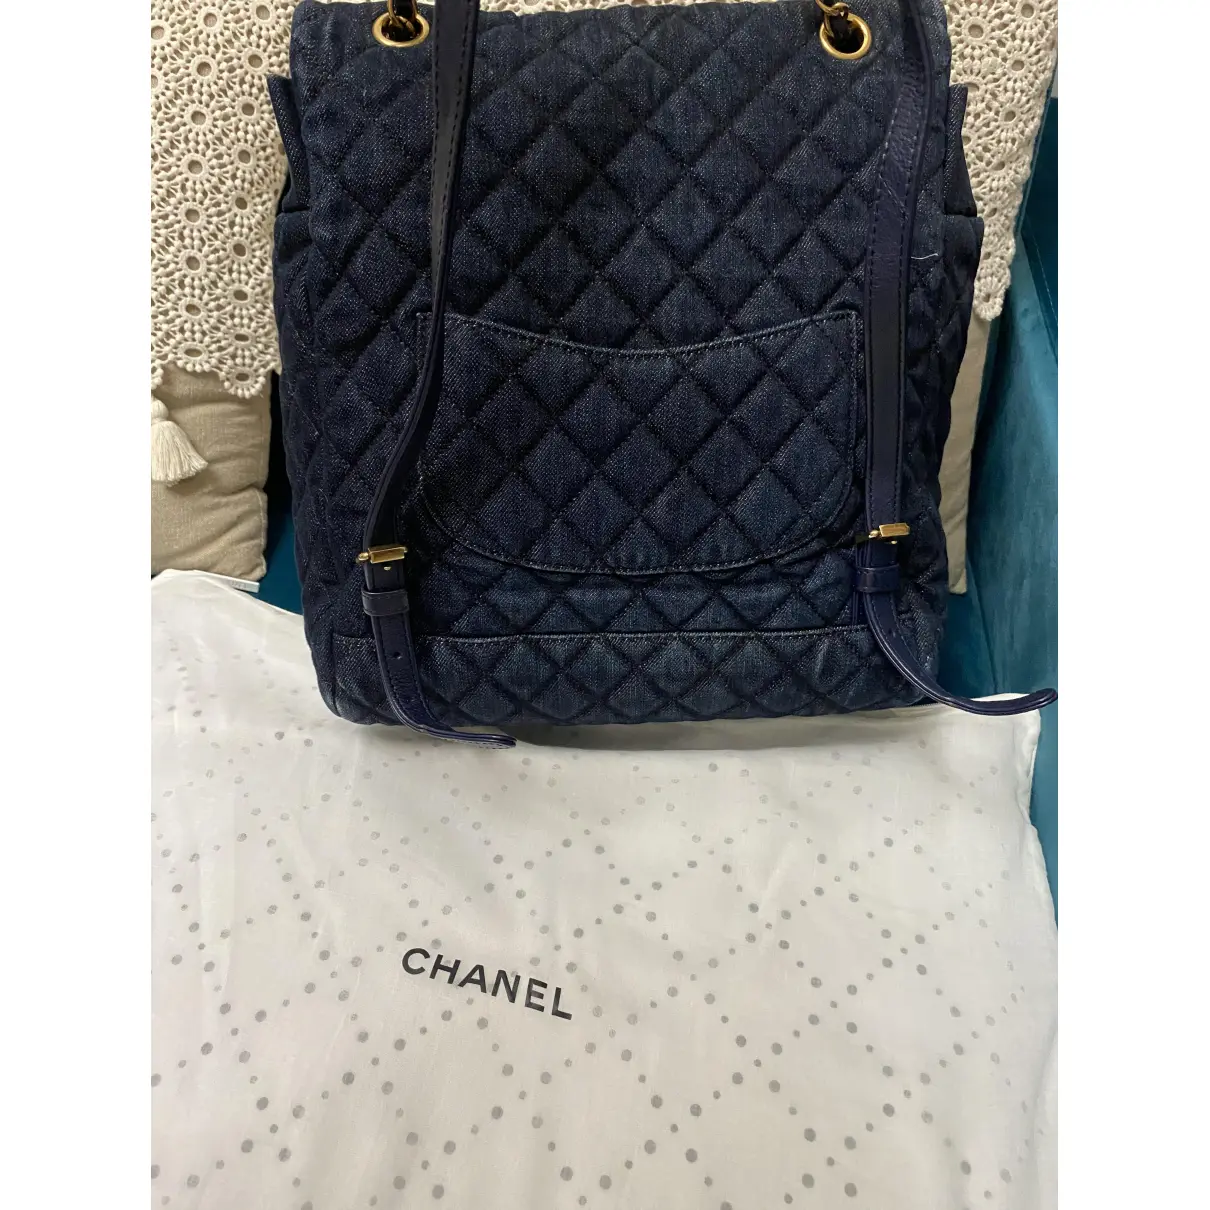 Buy Chanel Timeless/Classique leather backpack online